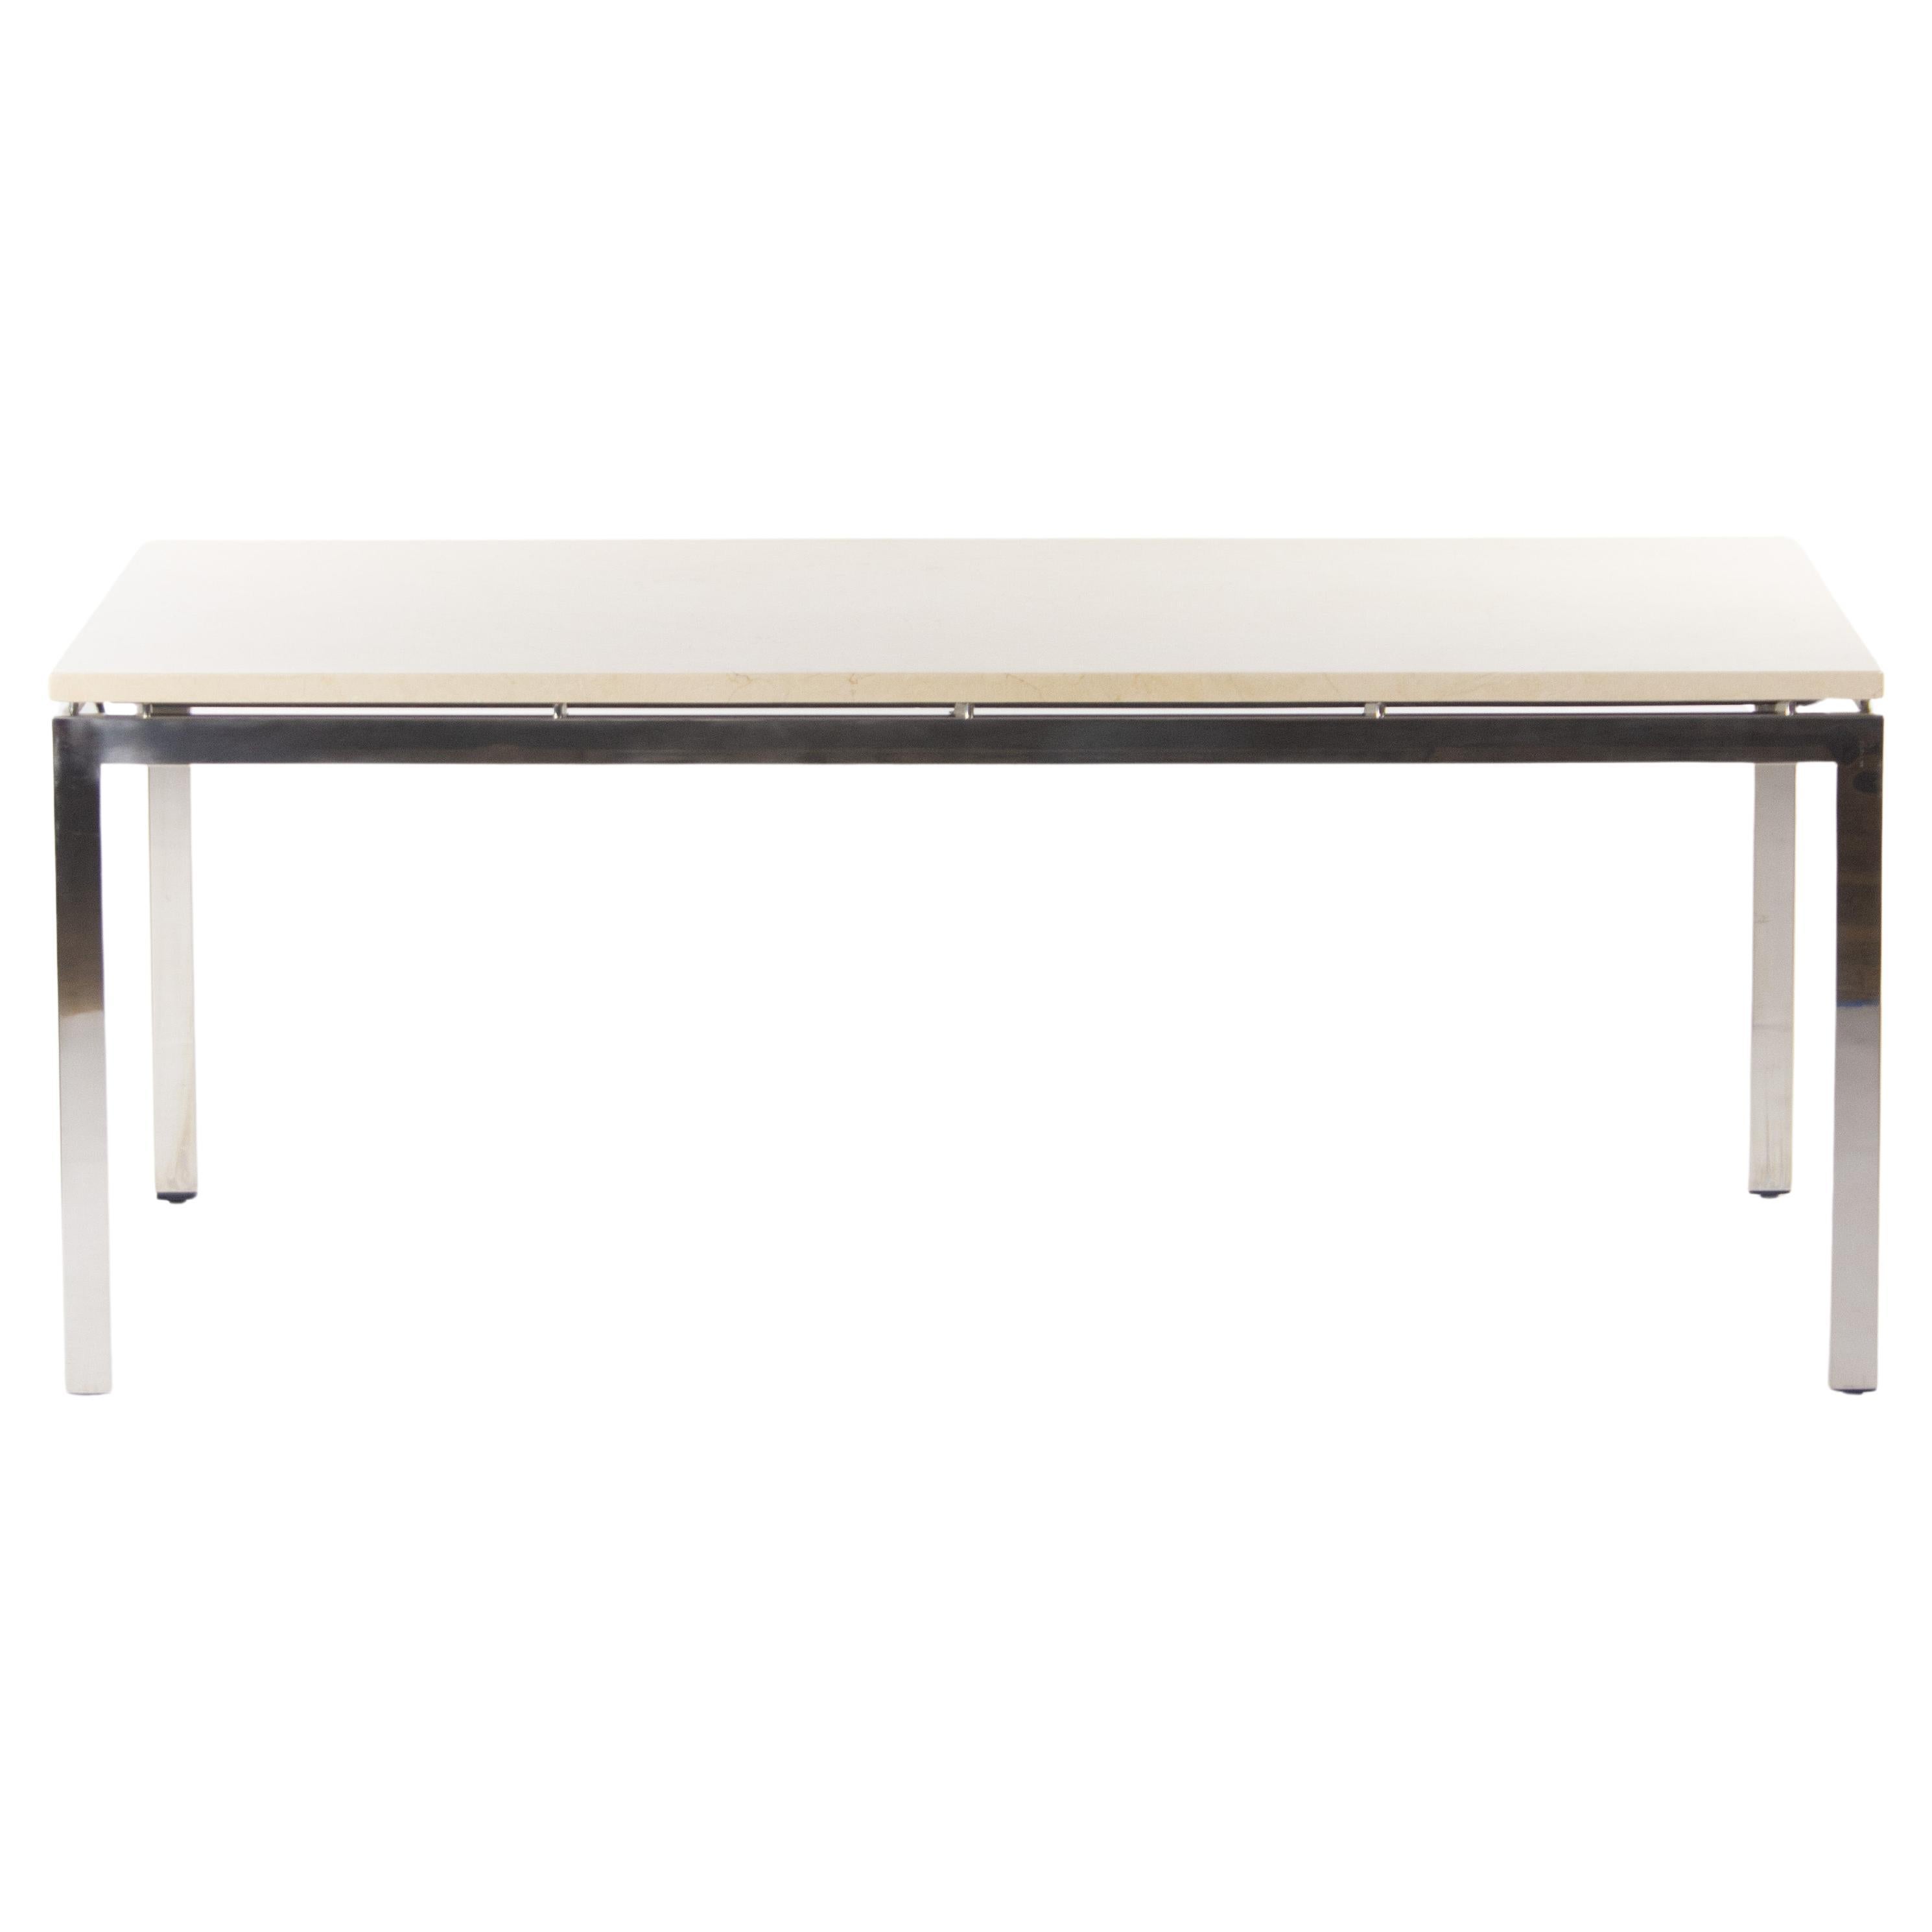 Granite Cumberland Meeting Dining Conference Table Beige w/ Steel Base